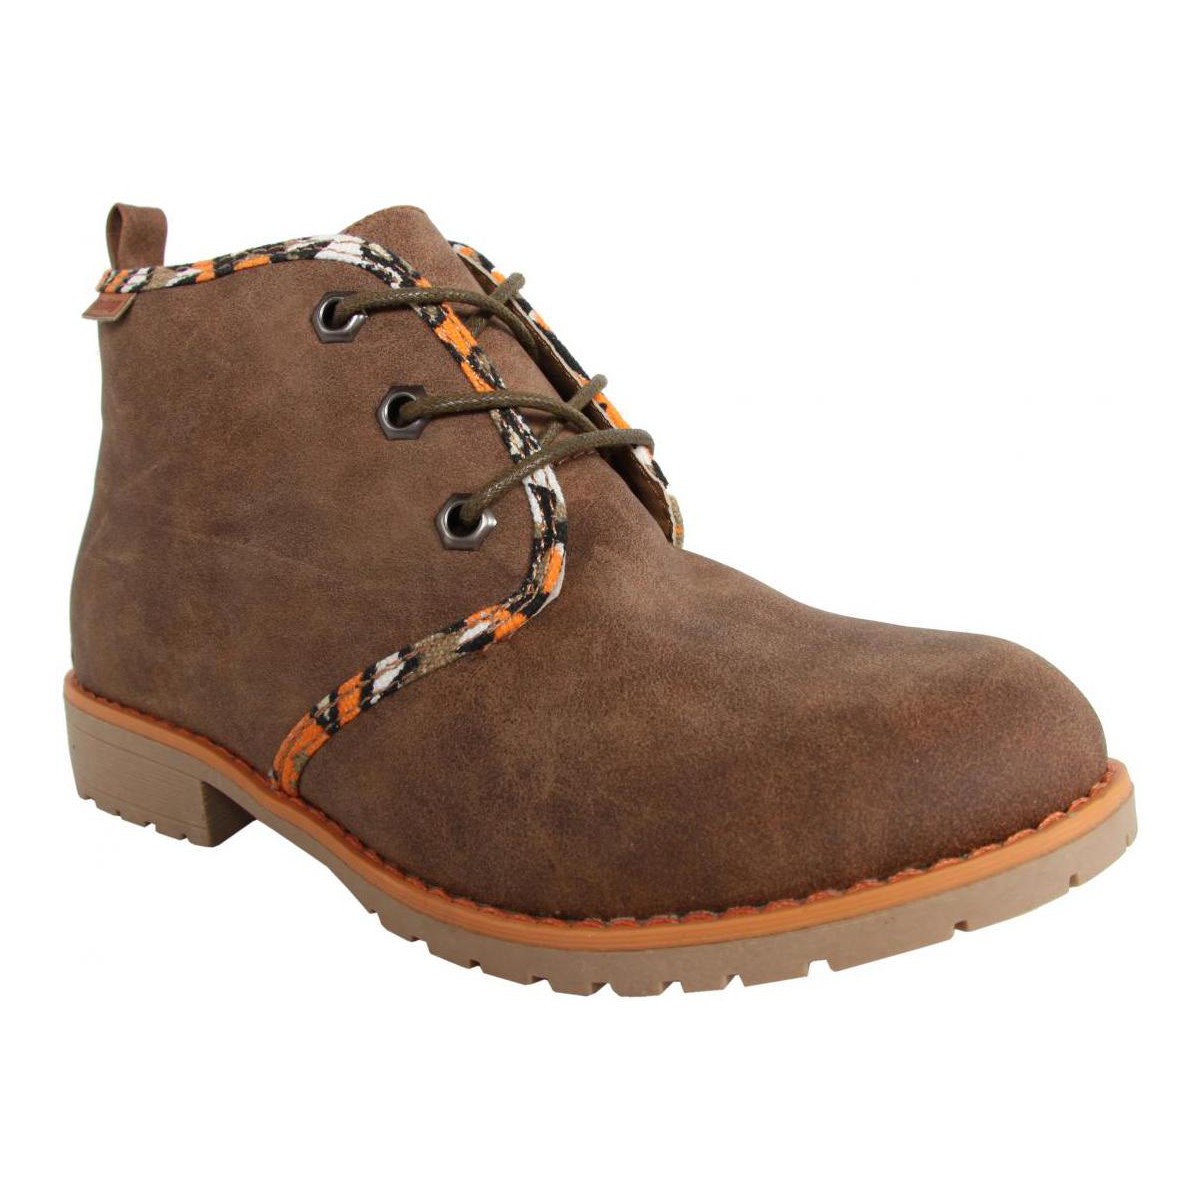 Chaussures Femme Bottines MTNG 52954 52954 